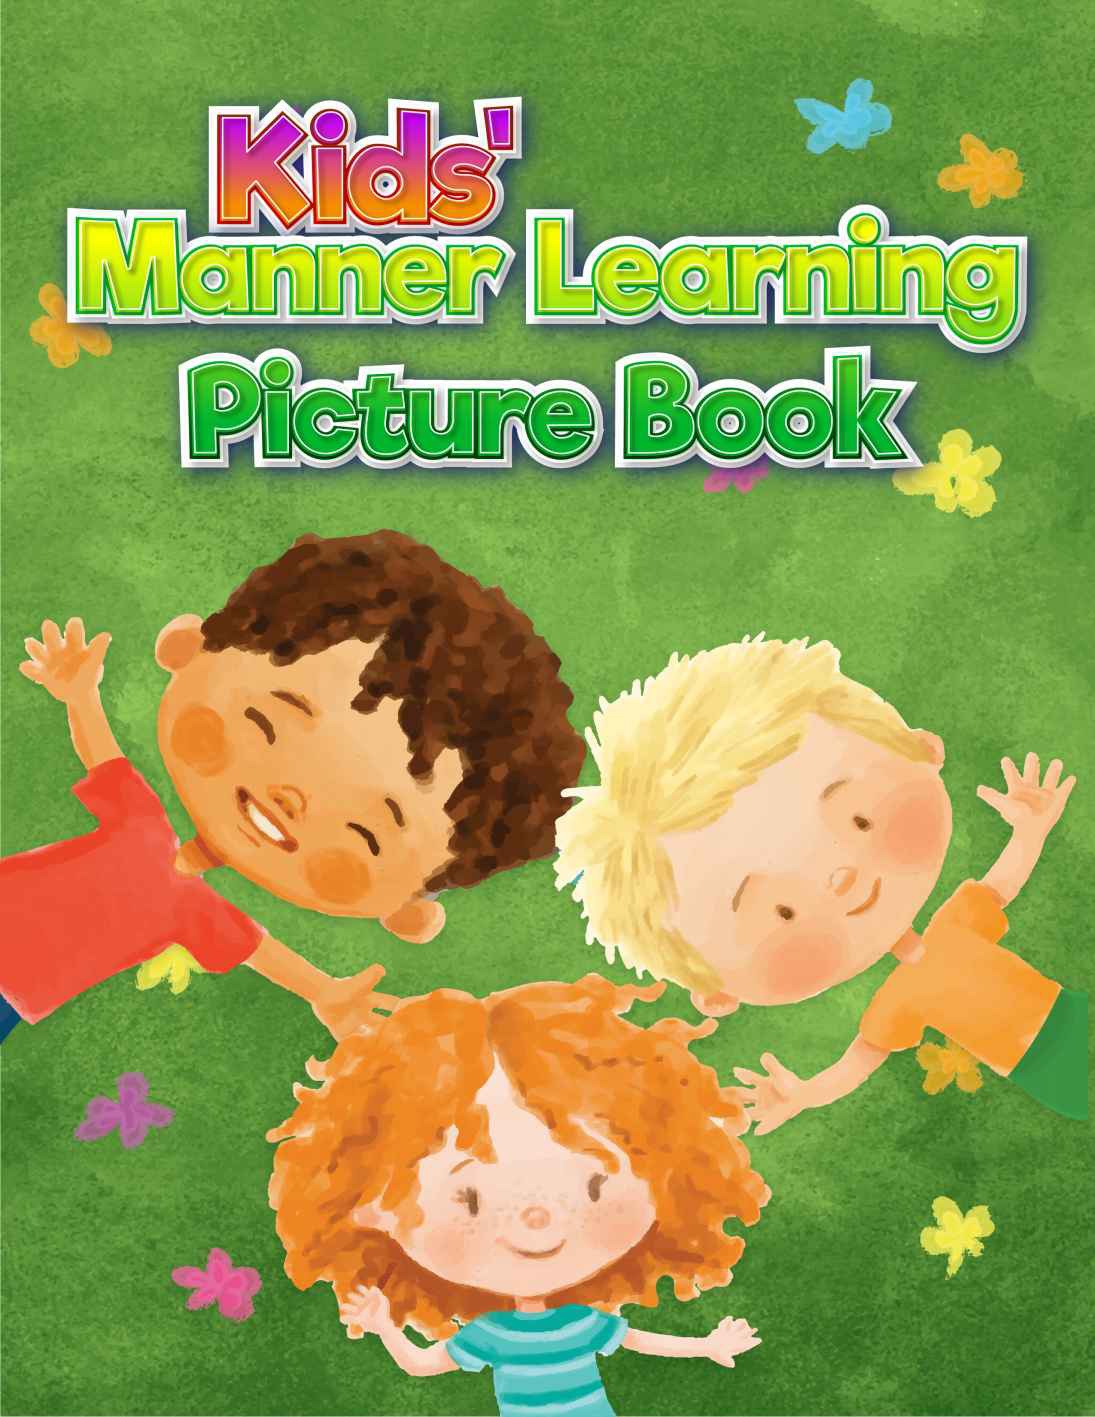 Kids’ Manner Learning Picture Book: Kids’ Manner, behavior, discipline learning book; Simple reading and knowing facts with great fun; Builds good conduct; For Ages 4 to 8 - Epub + Converted PDF